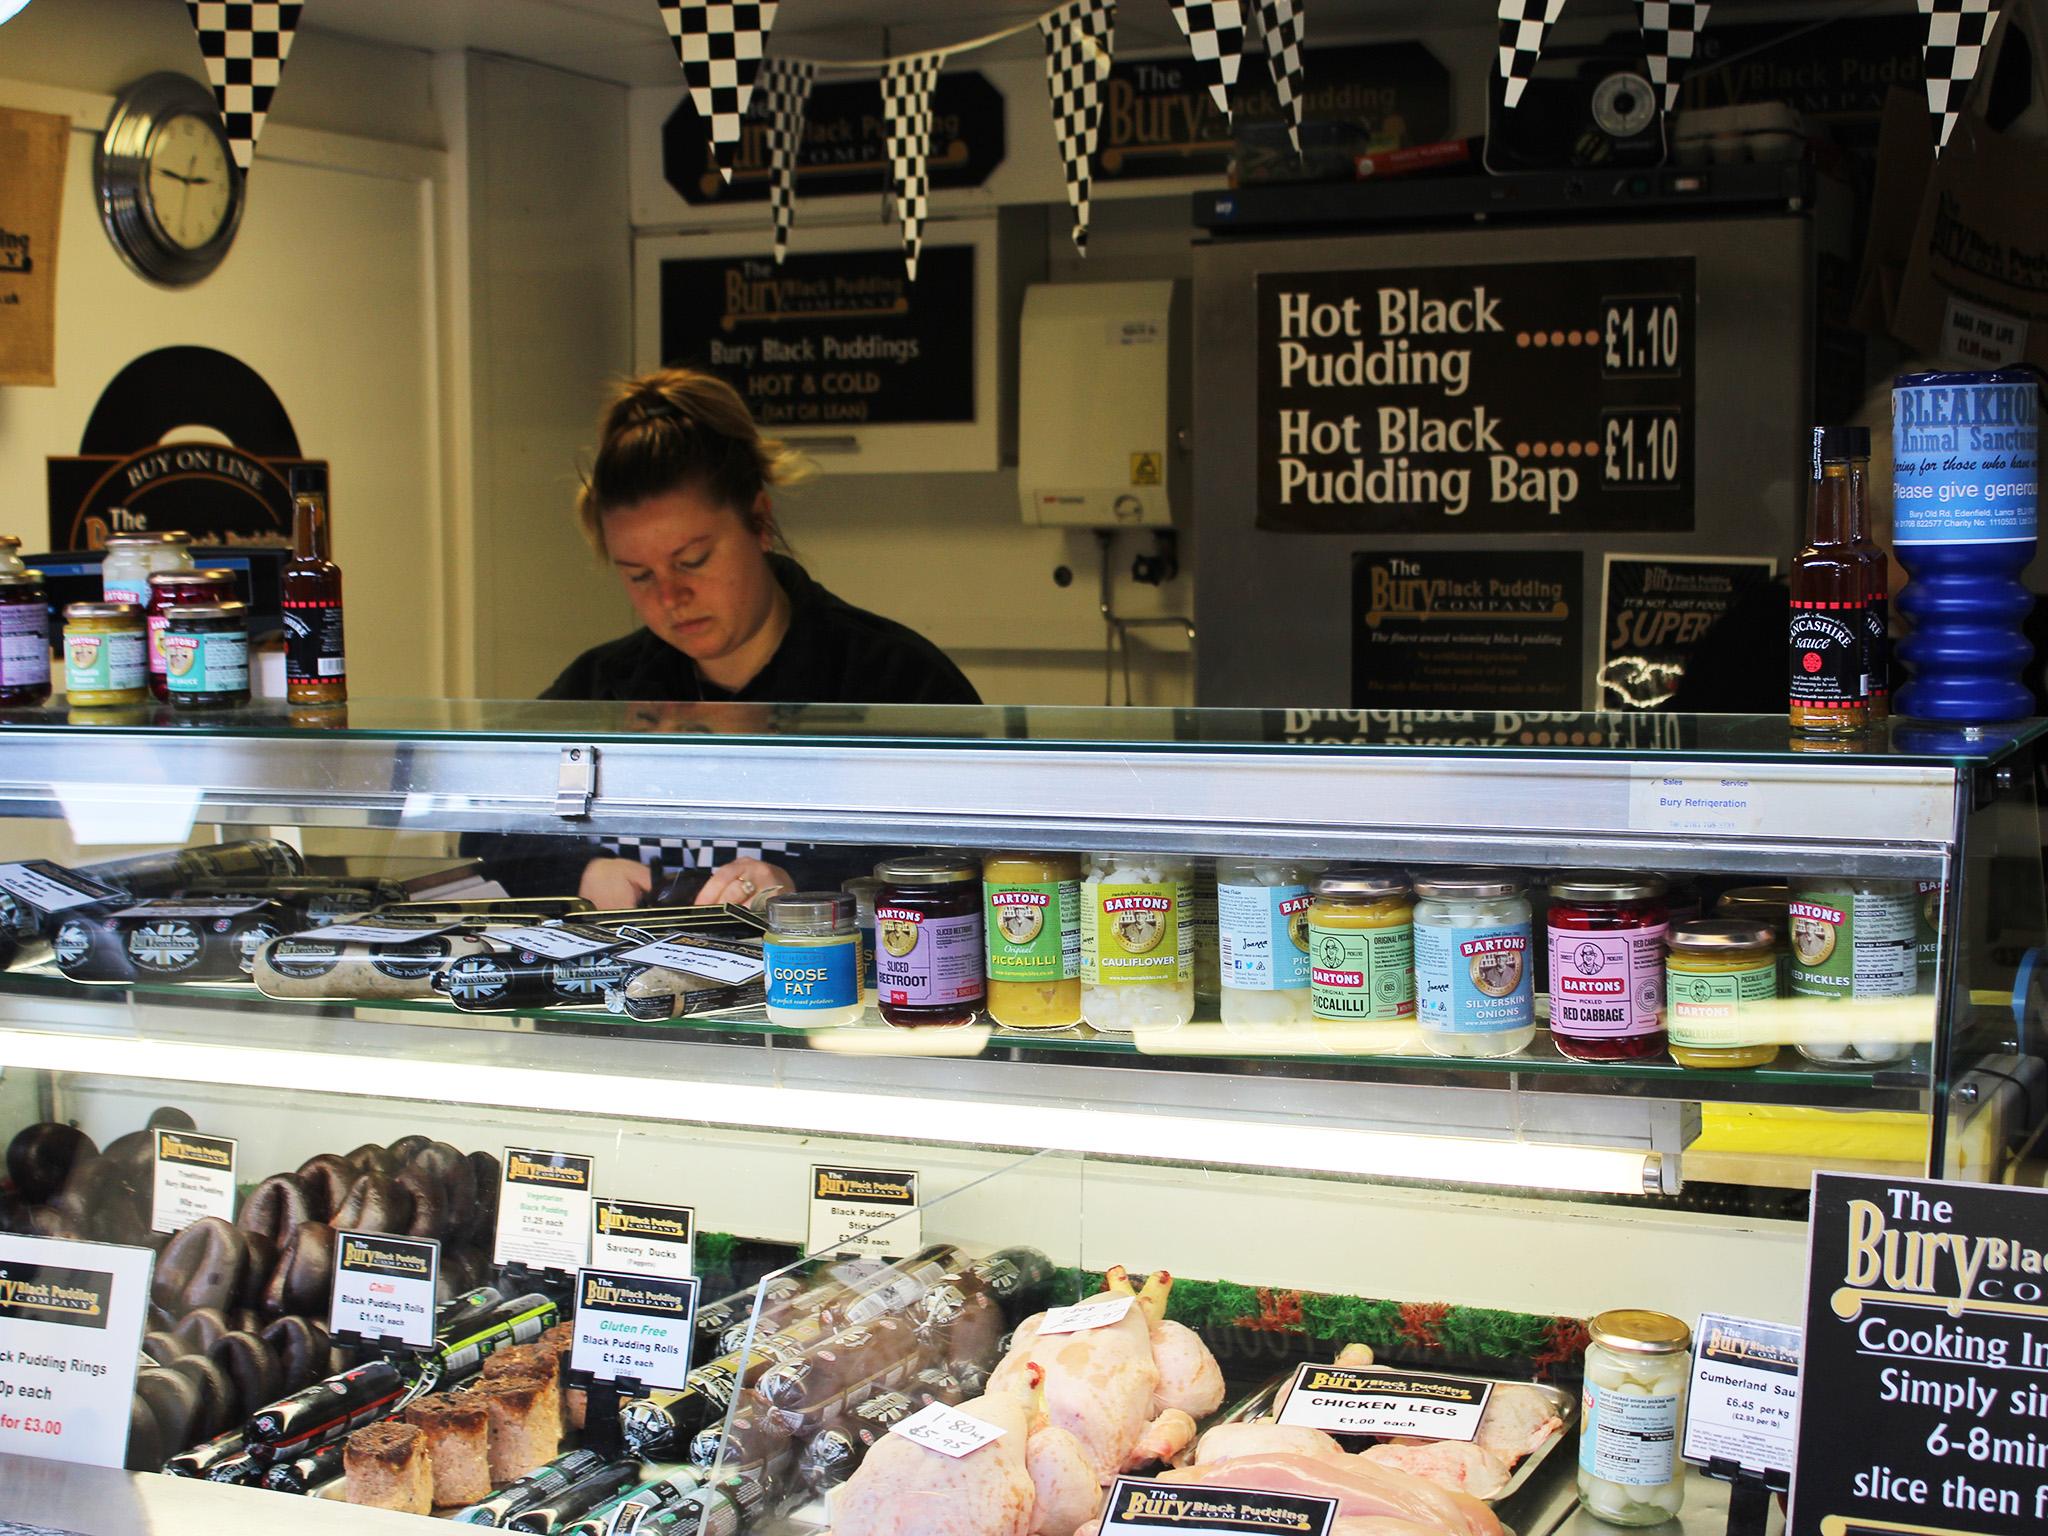 &#13;
Bury Market is famous in Greater Manchester for its black pudding &#13;